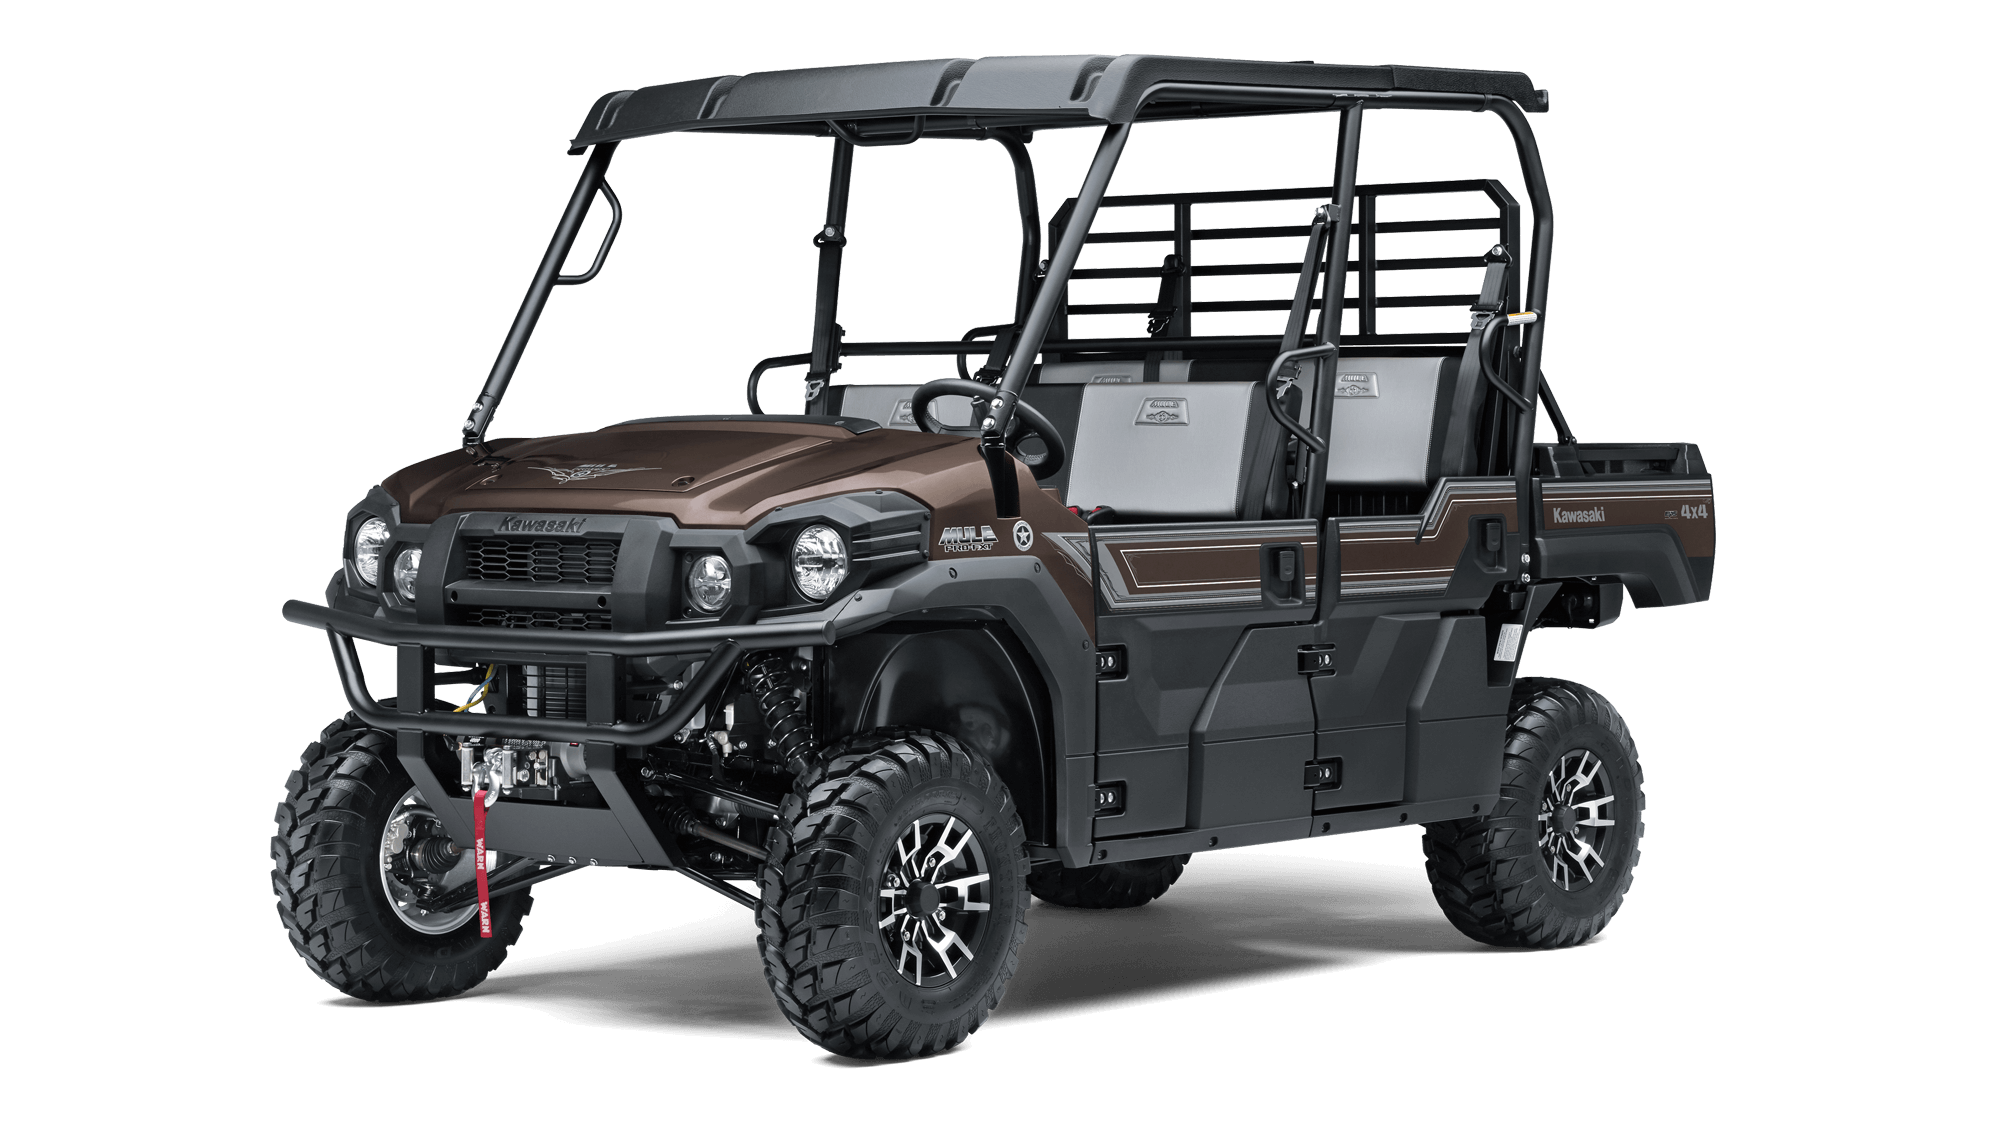 MULE PRO-FXT RANCH EDITION Image